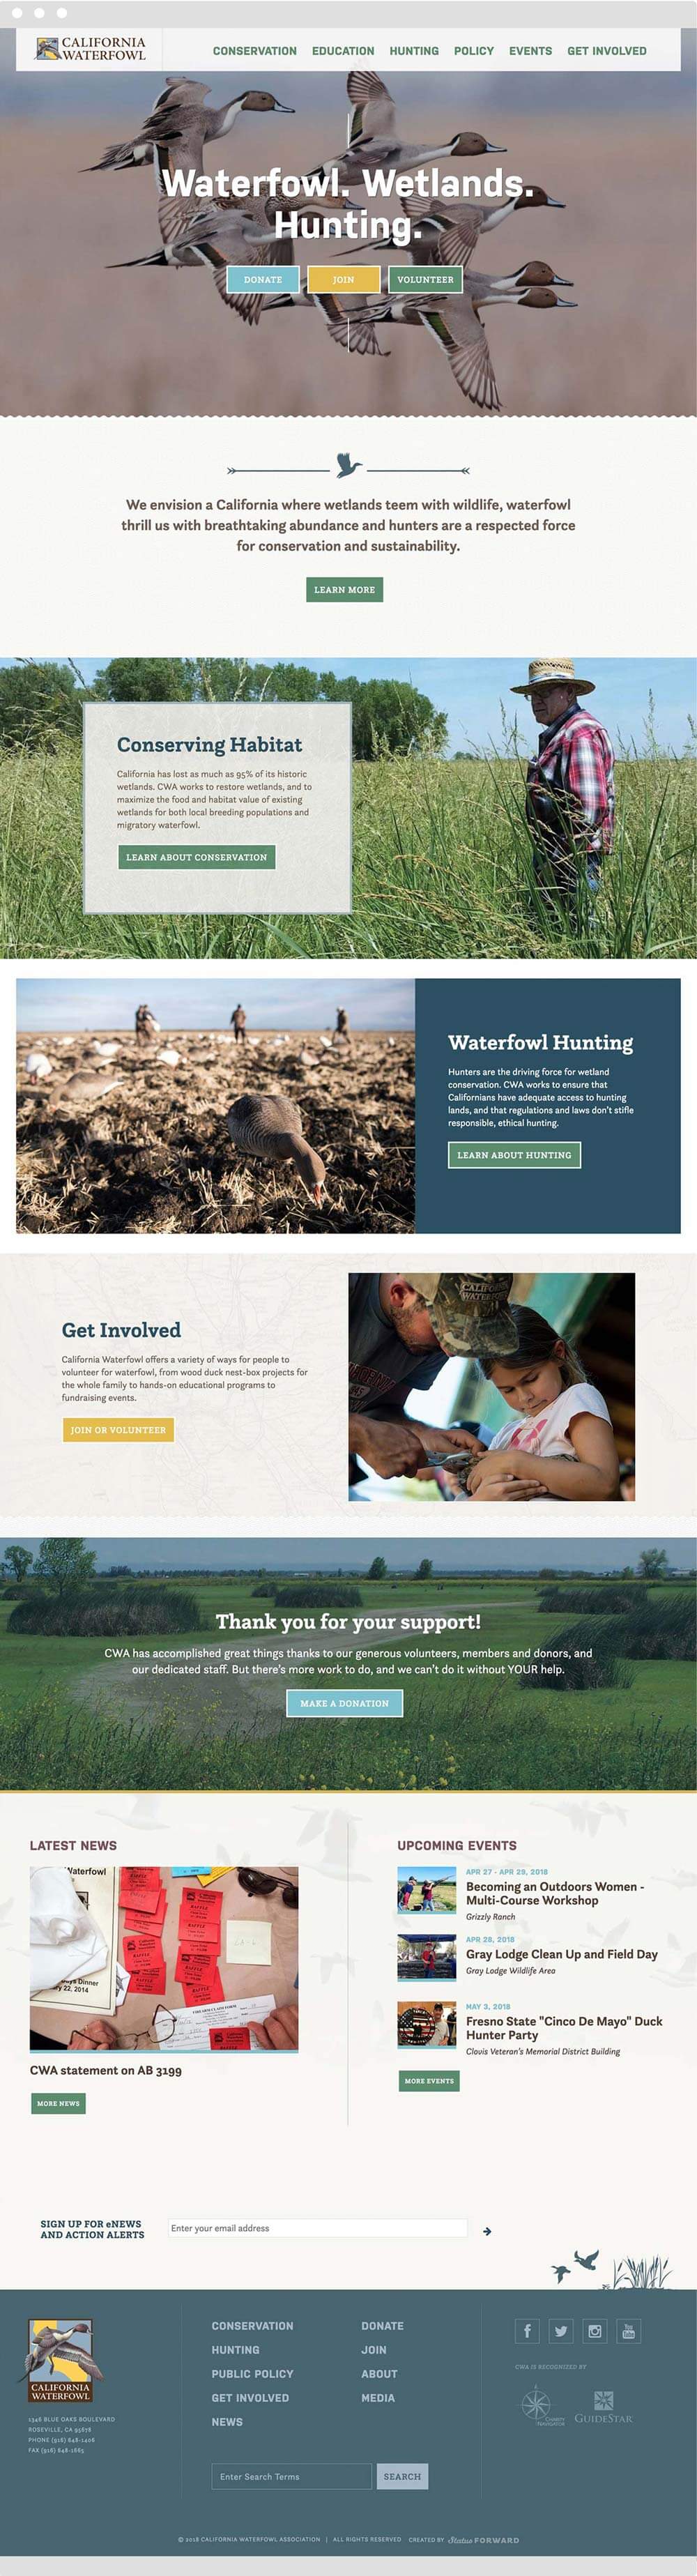 California Waterfowl Home Page Design in Full